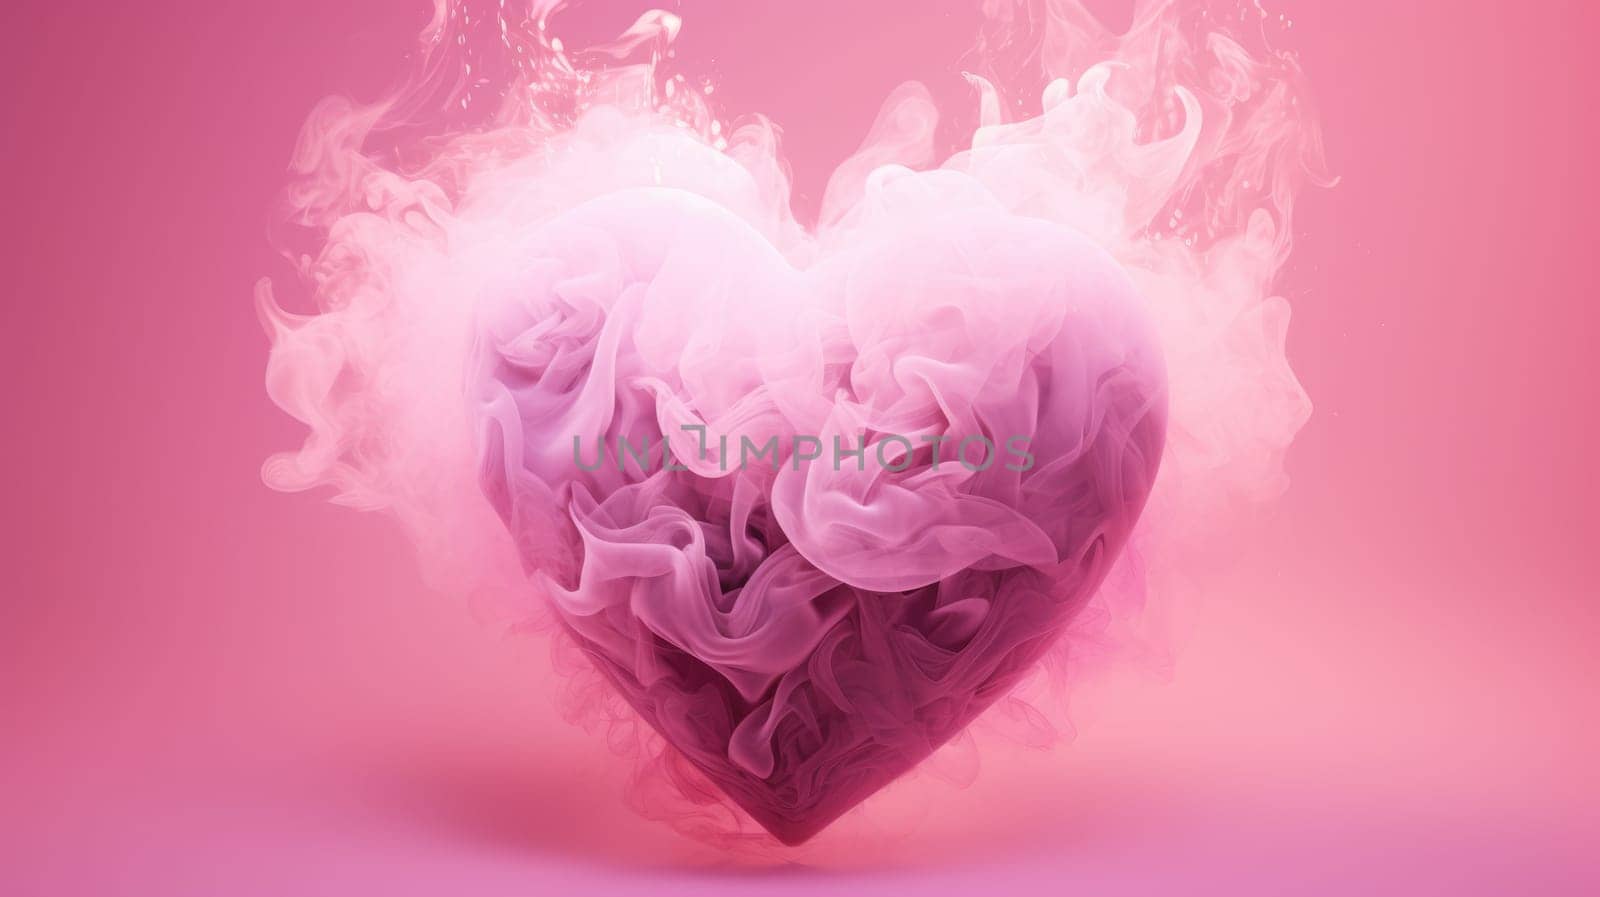 Pink heart made of light smoke on a pink background. Love and valentine concept by natali_brill